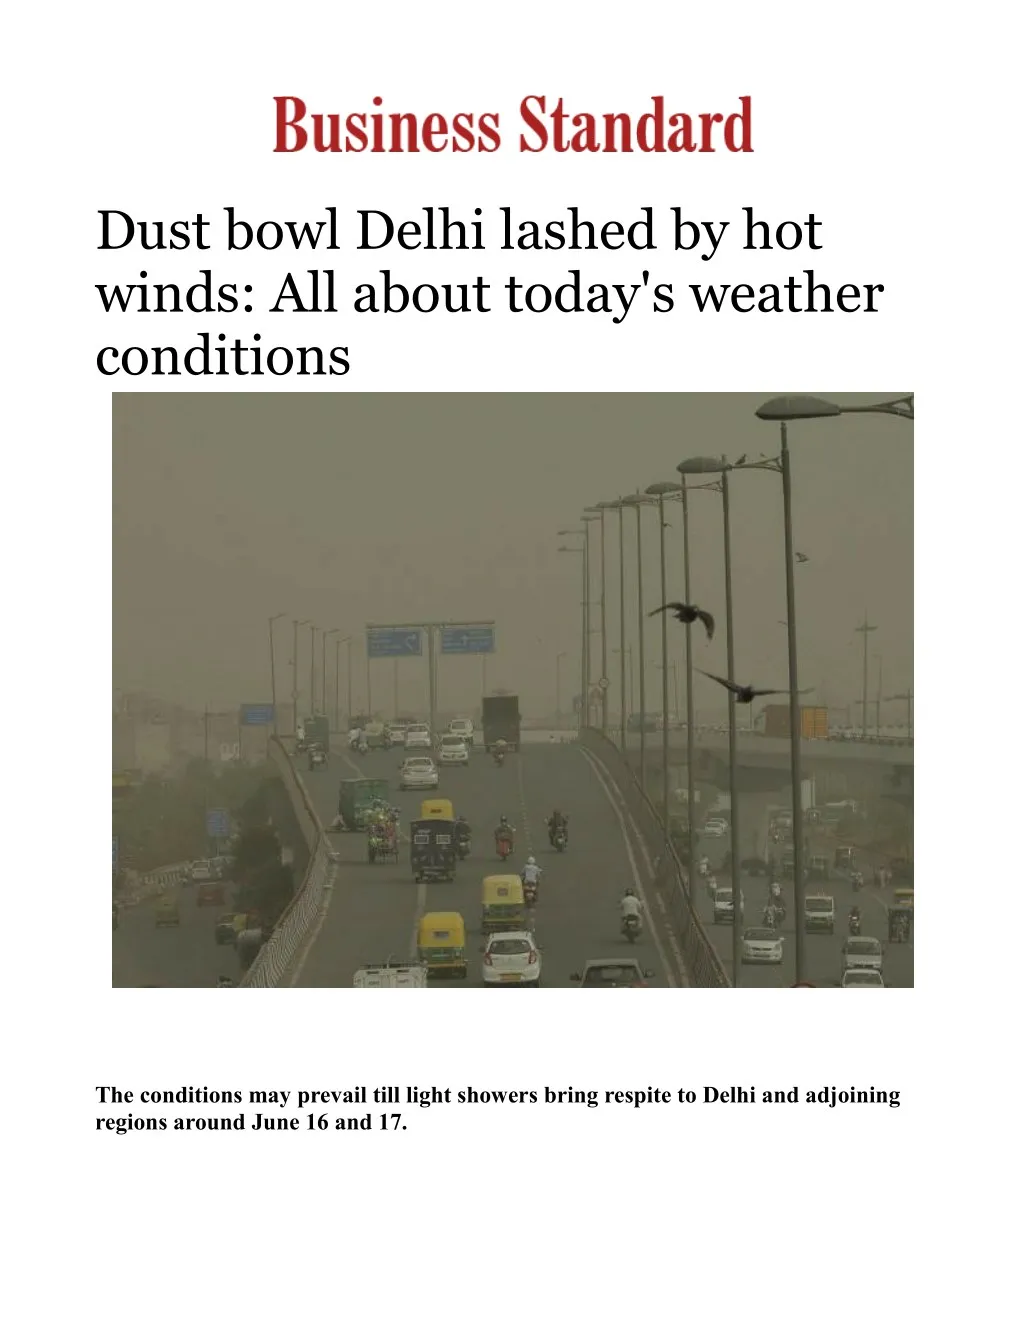 dust bowl delhi lashed by hot winds all about